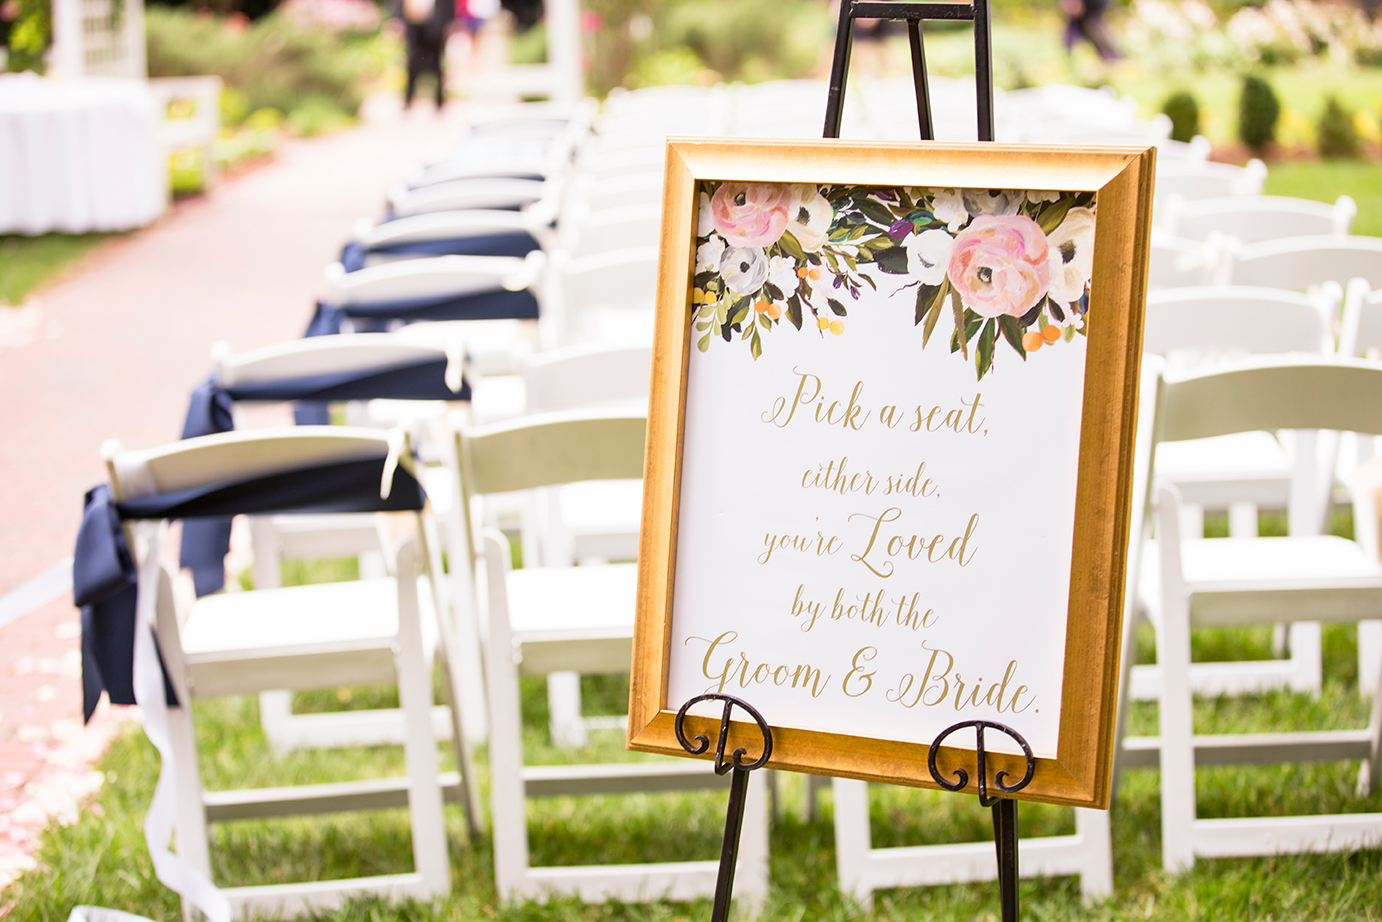 Tips for Creating the Perfect Wedding Day Timeline - Image Property of www.j-dphoto.com